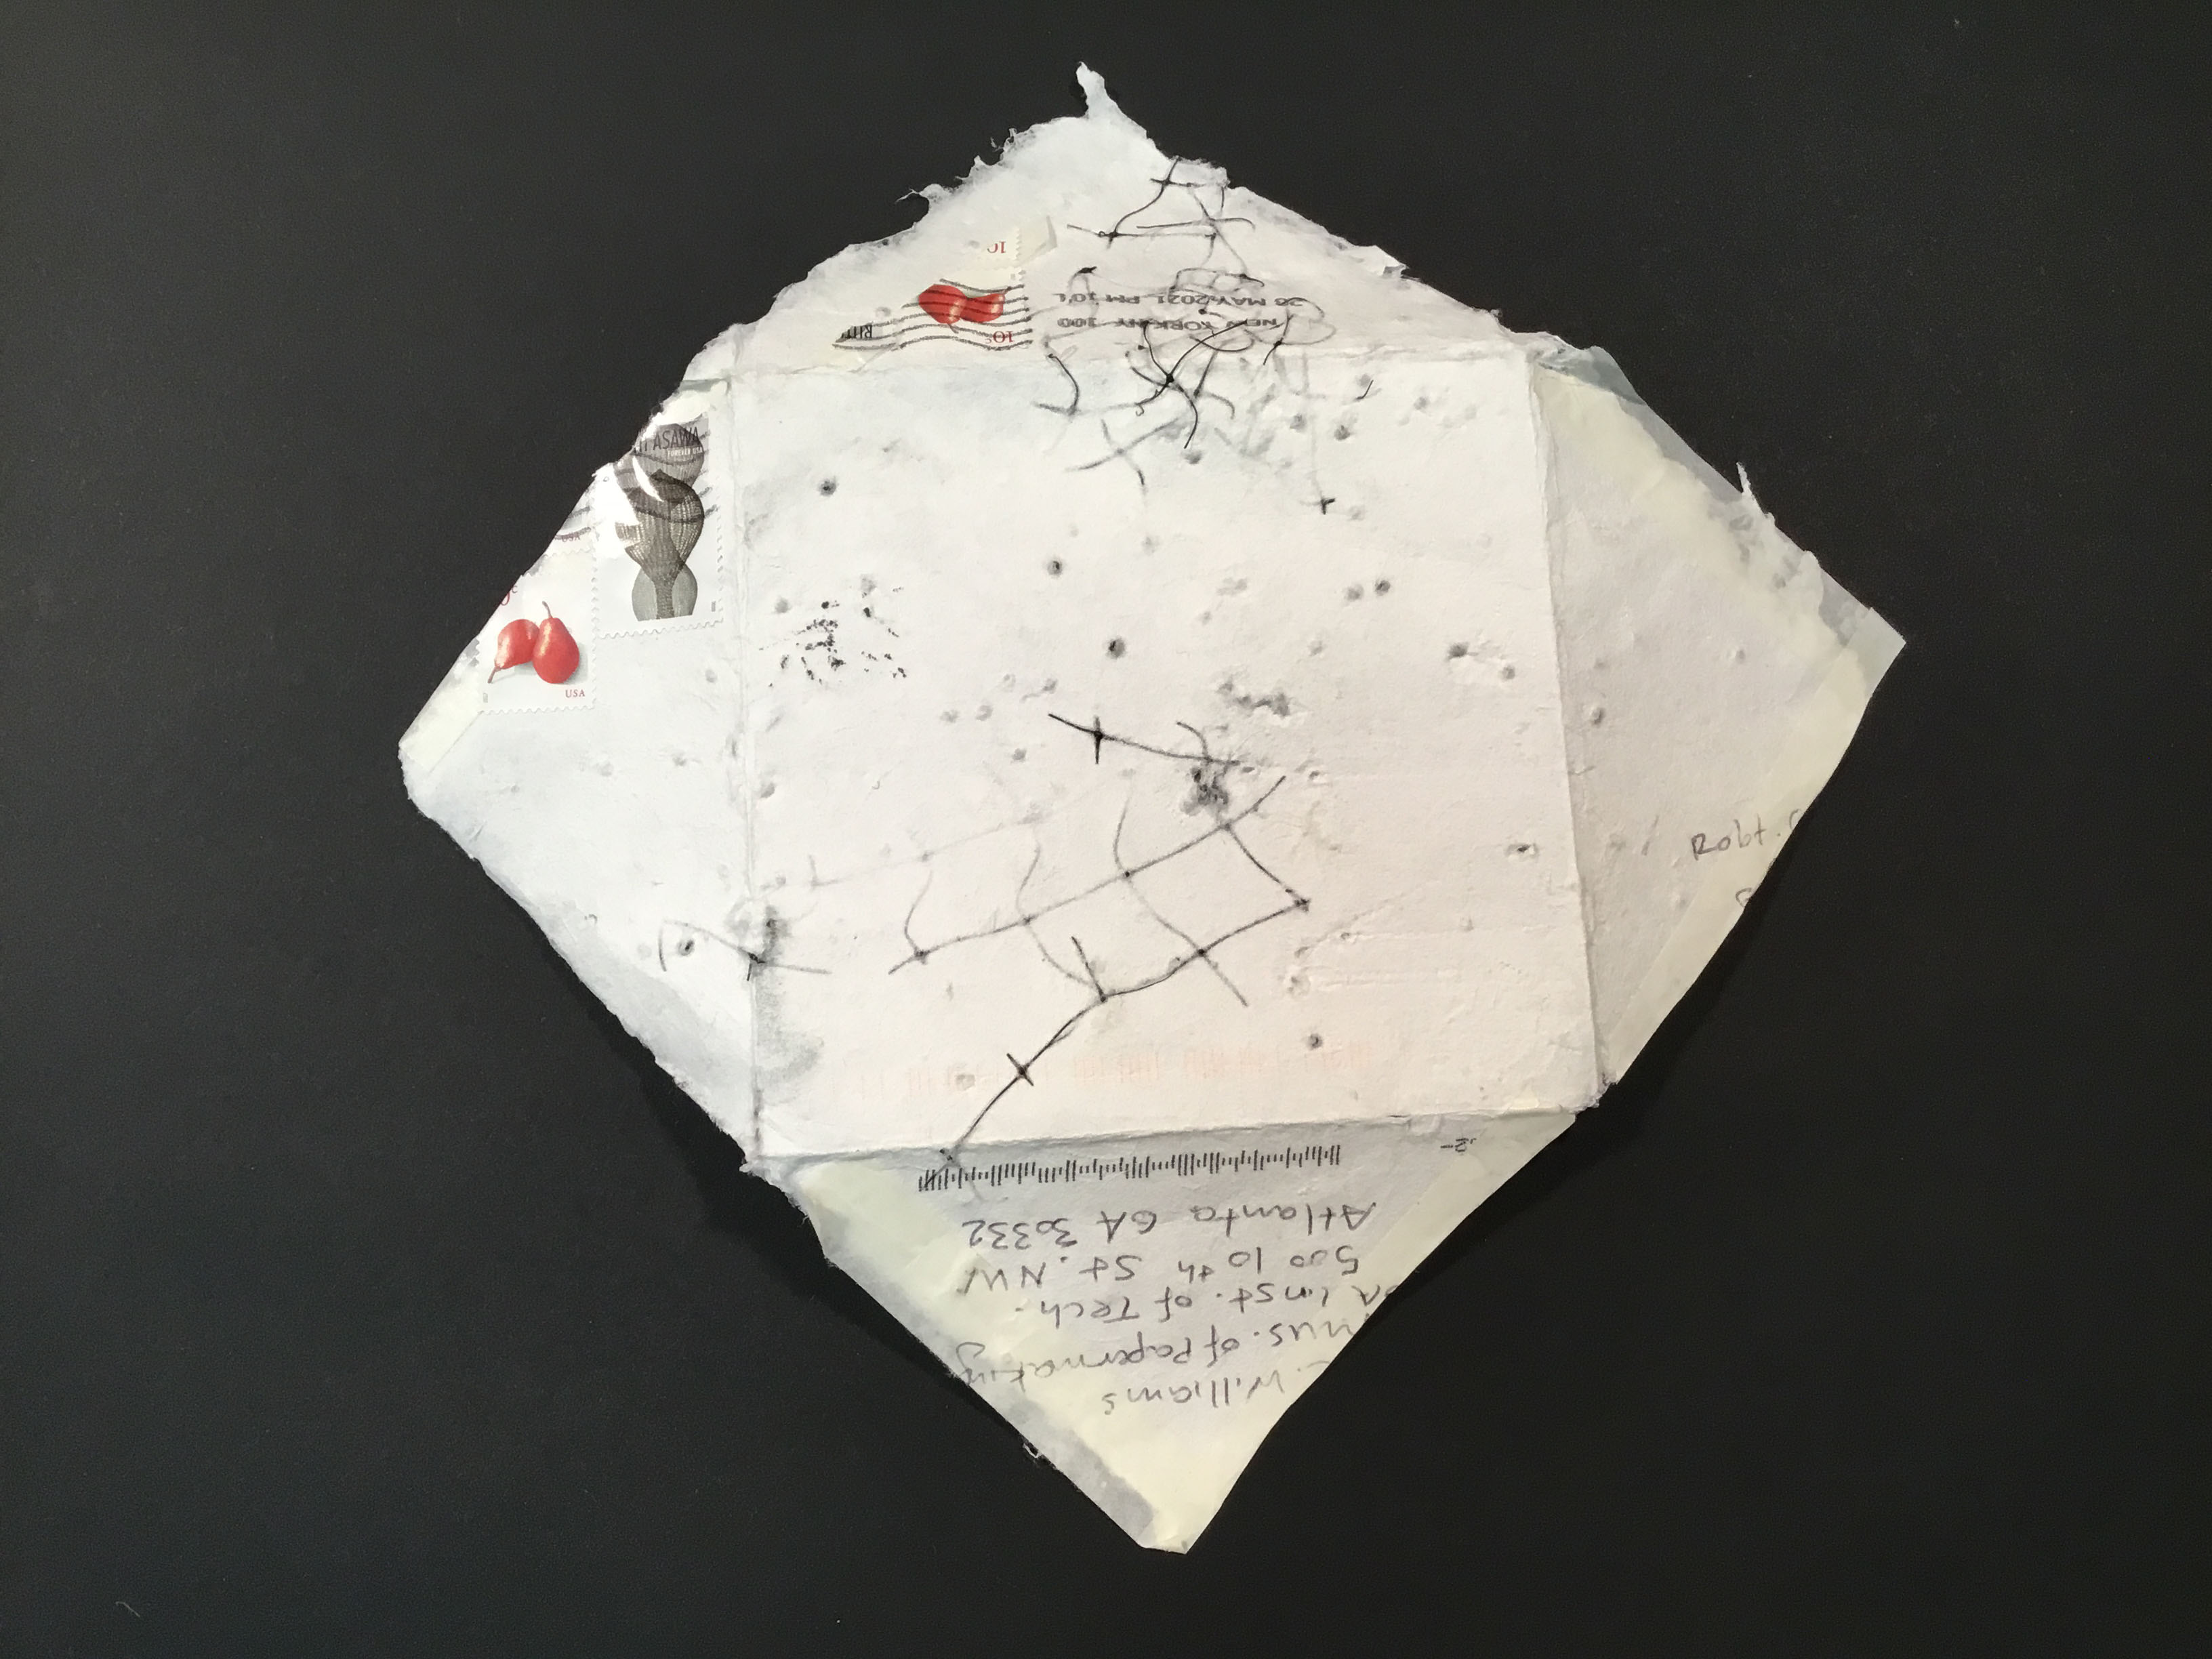 A white handmade paper envelope with black beads, bird netting, linen snippets, and black thread as inclusions. The envelope unfolds to become a square sheet of paper.